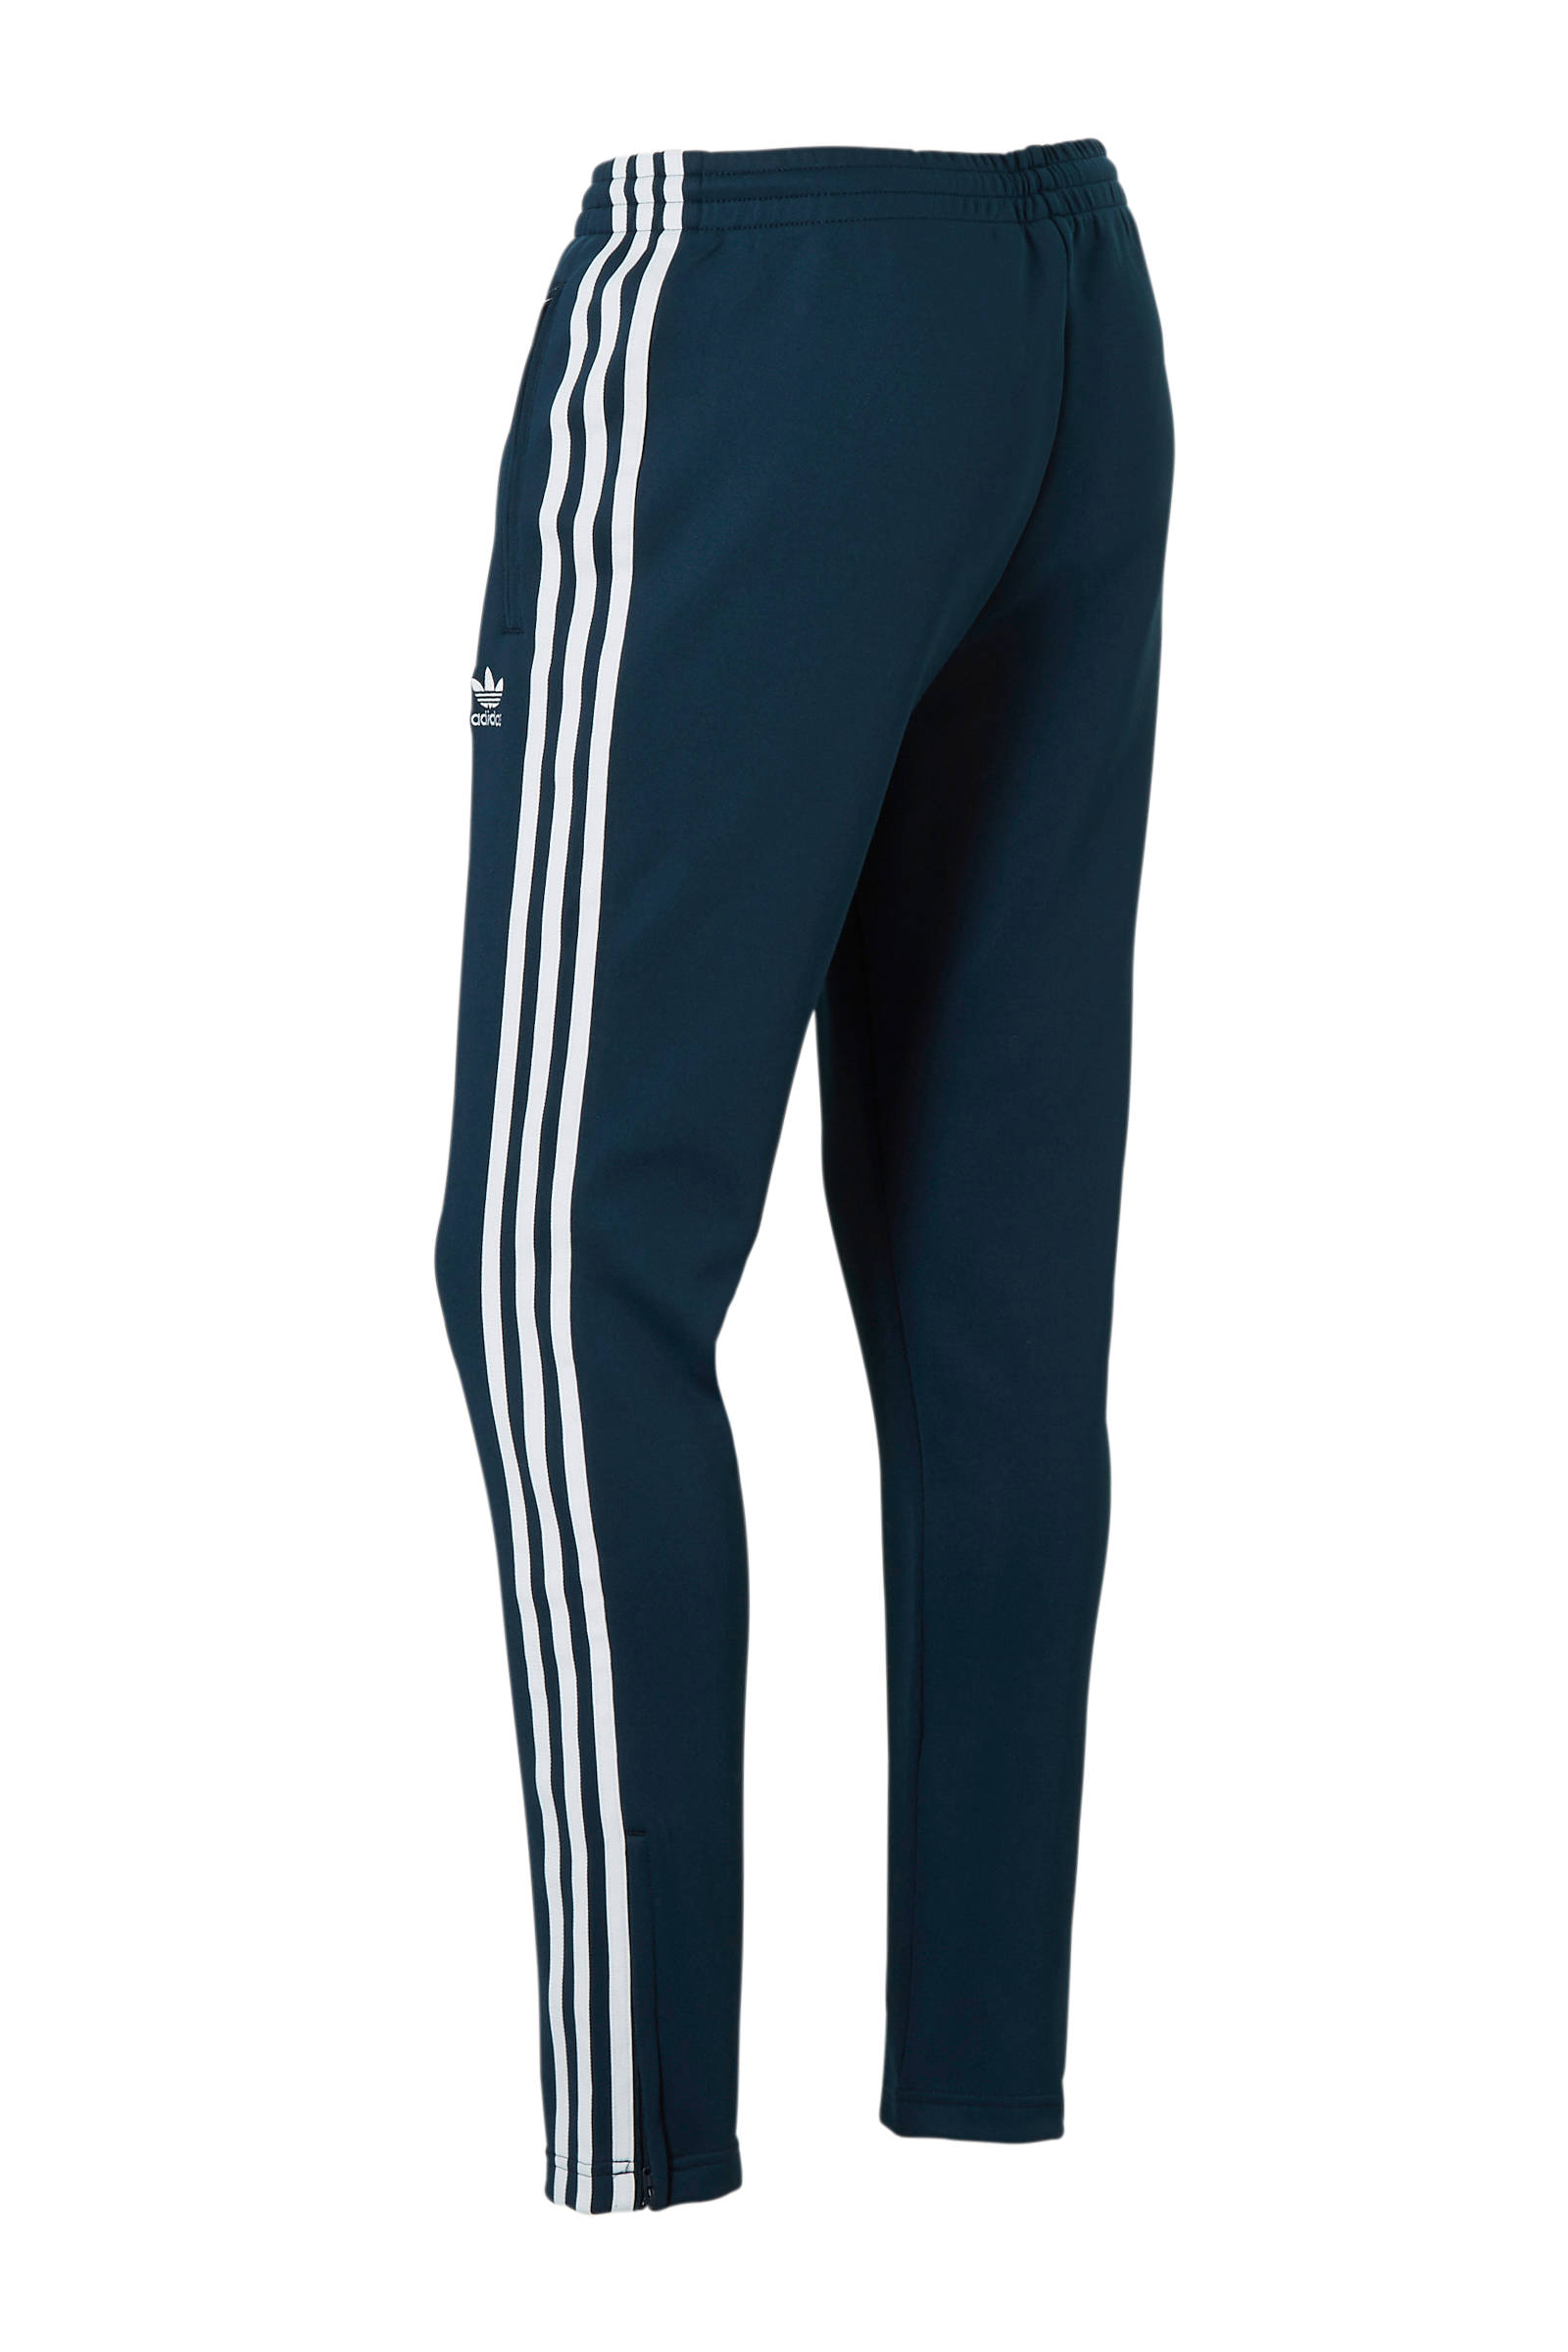 adidas broek donkerblauw dames, OFF 76%,where to buy!